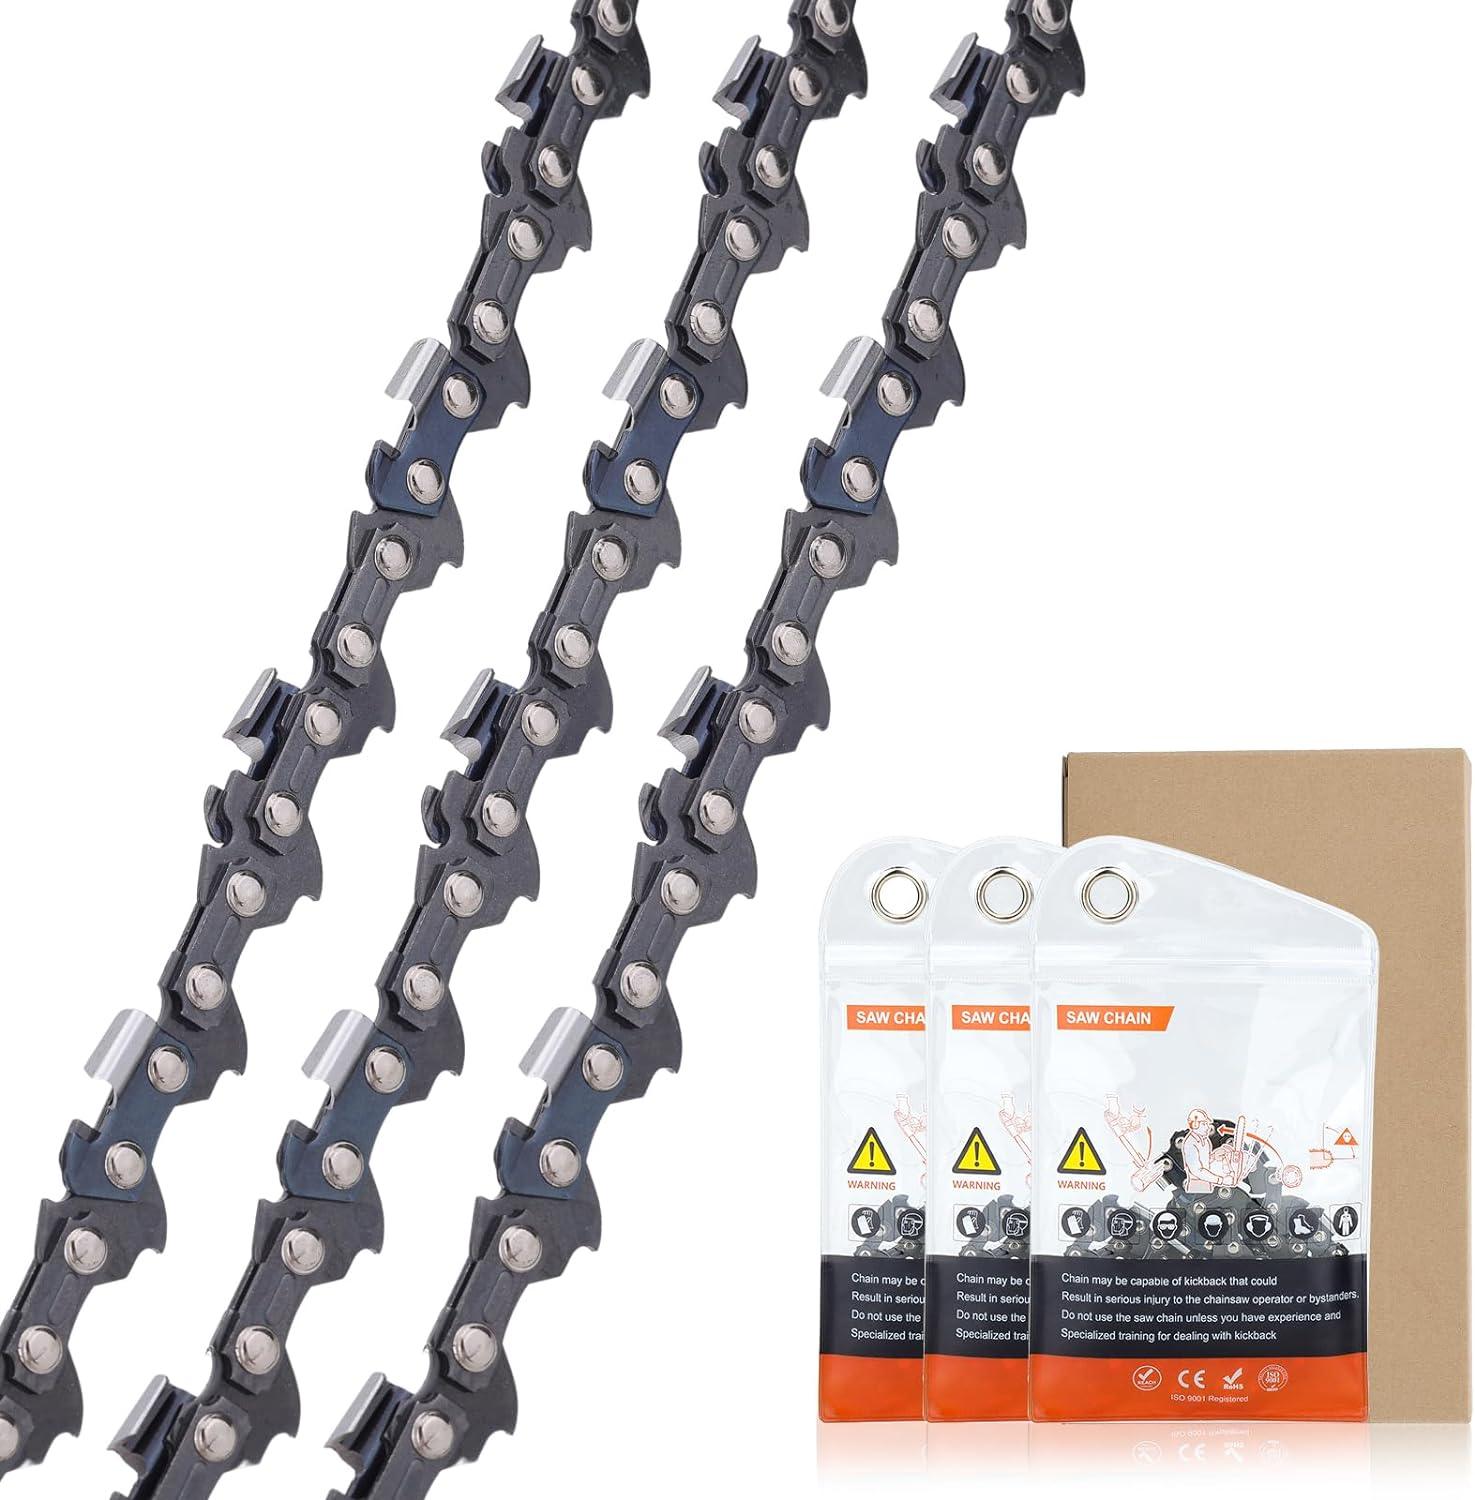 3-Pack Chainsaw Chain for 10 Inch (25cm) Bar, 40 Drive Links, 3/8"LP .050" Gauge, Low-Kickback Compatible for Bosch, Black & Decker, Makita, Greenworks, Ryobi and More - hipaparts